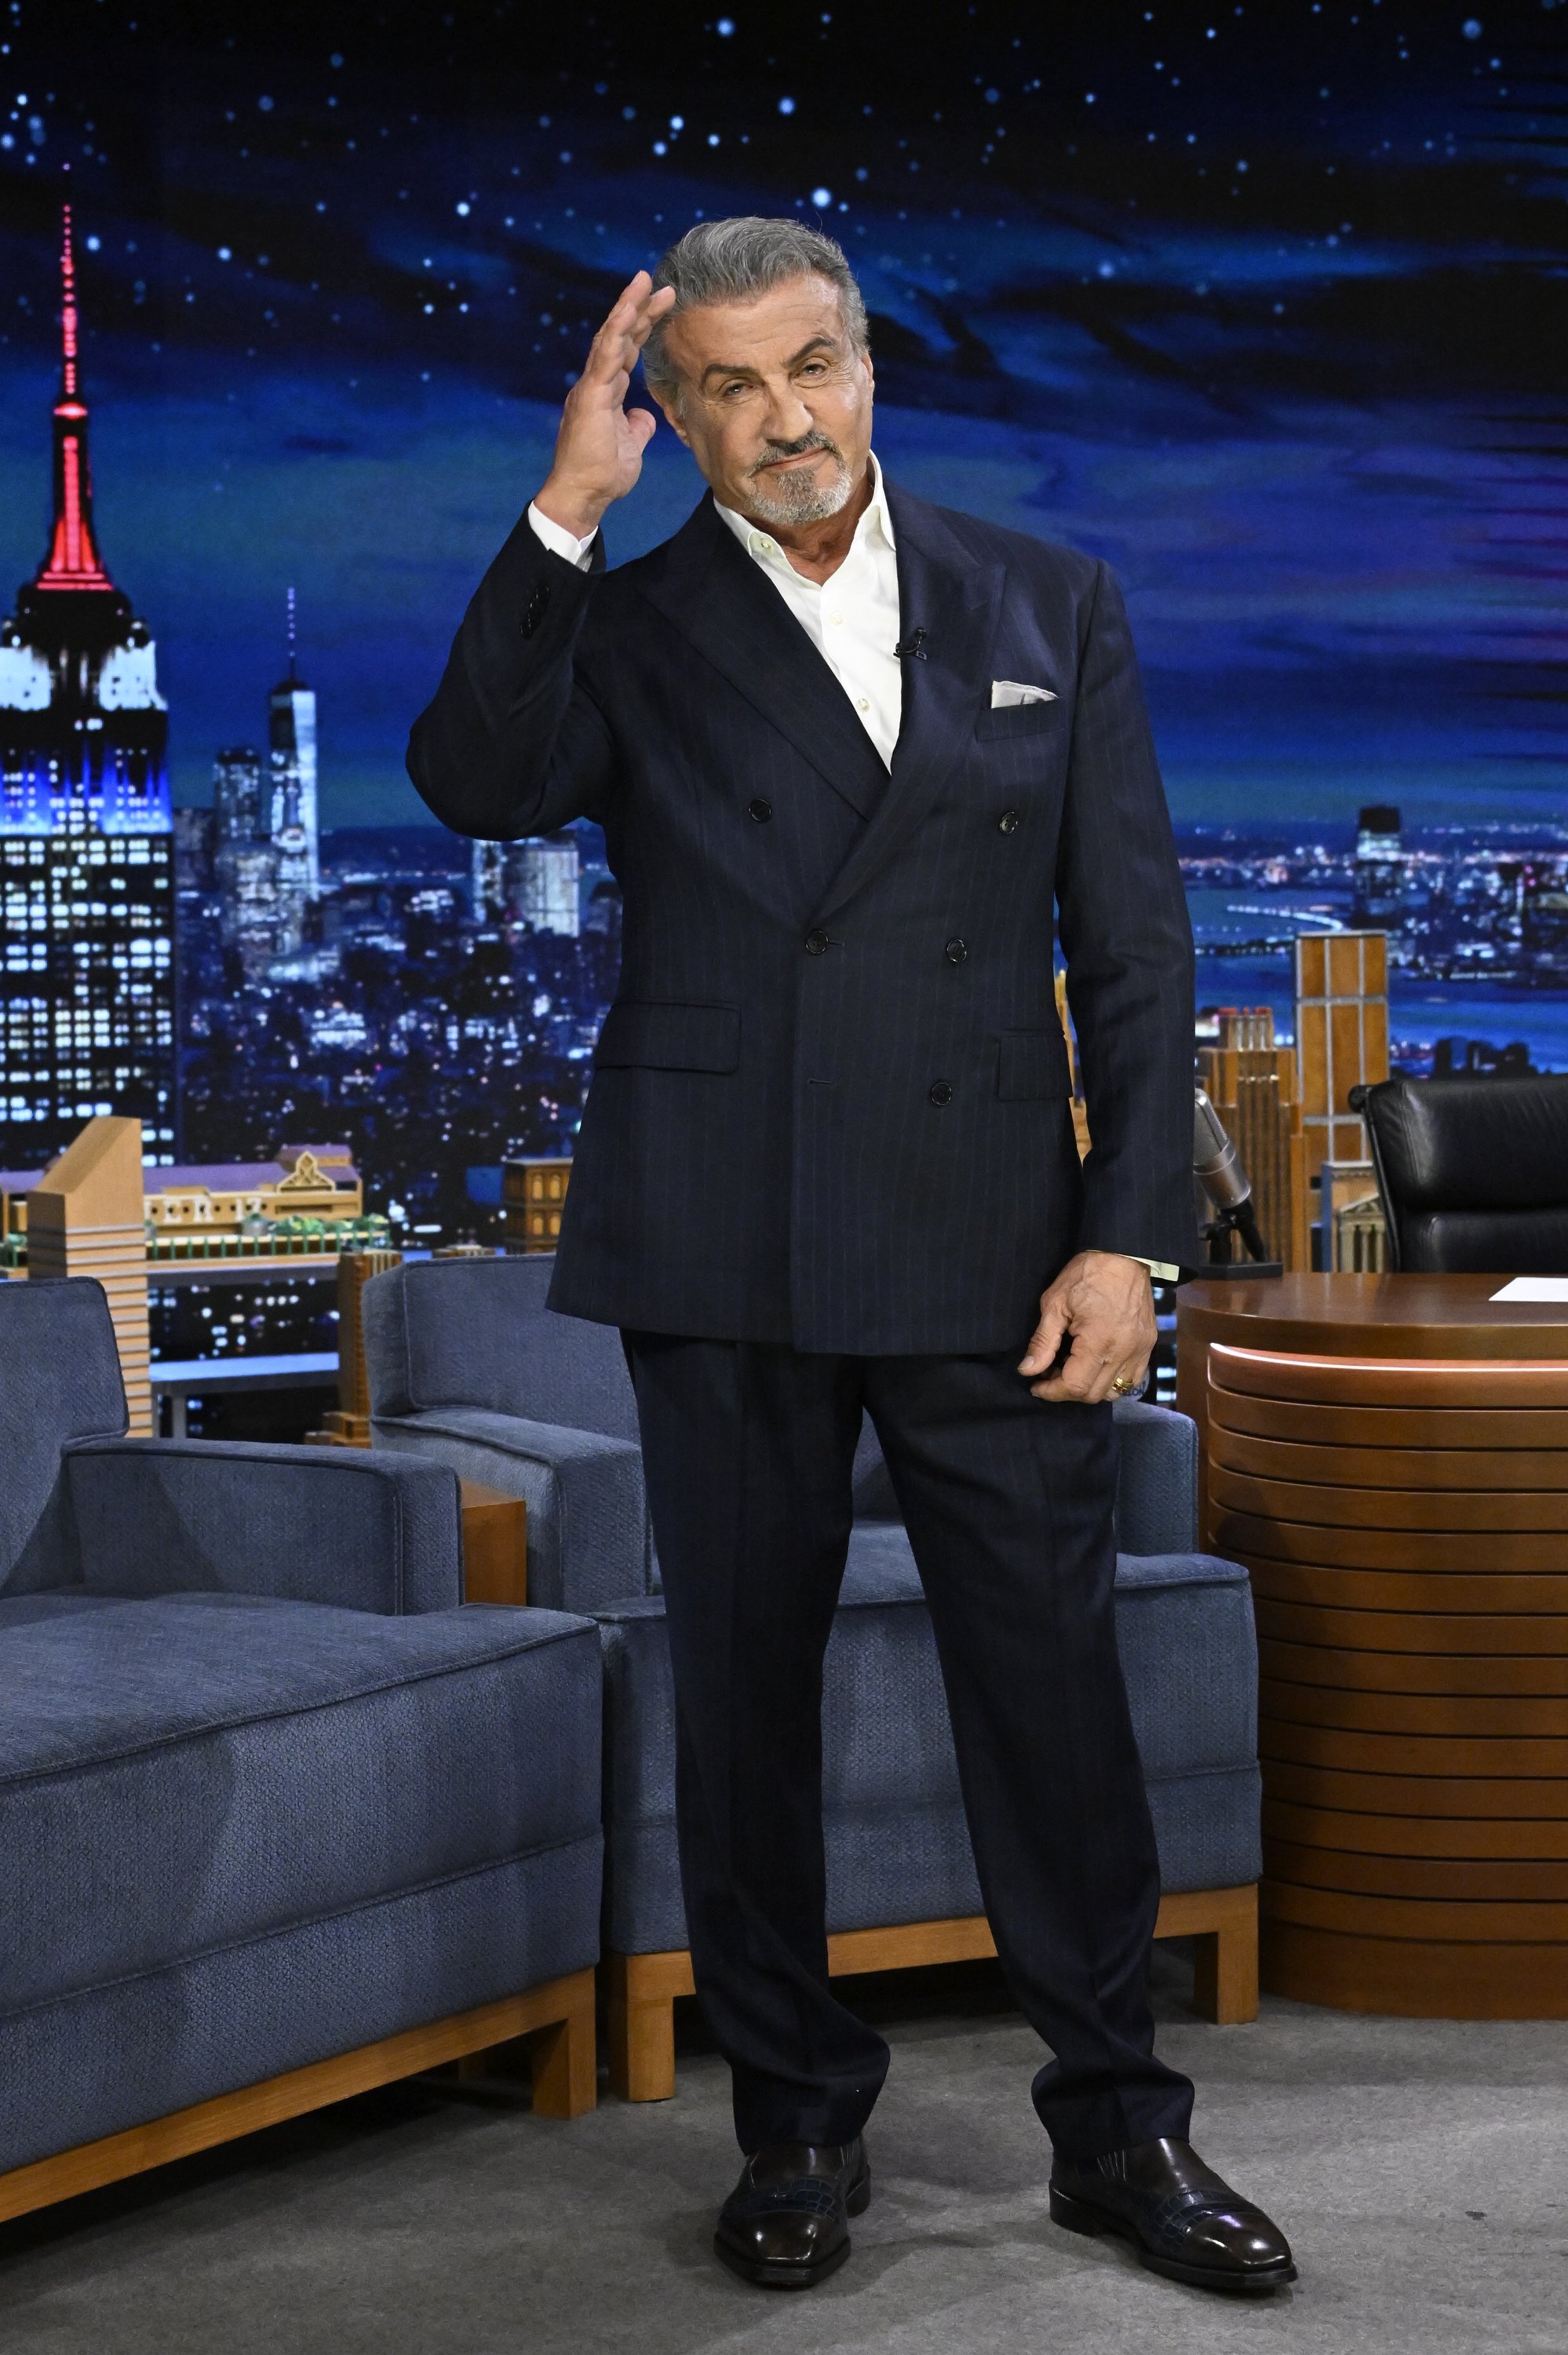 Sylvester Stallone bei seinem Auftritt in "The Tonight Show Starring Jimmy Fallon" am 11. November 2022 ┃Quelle: Getty Images